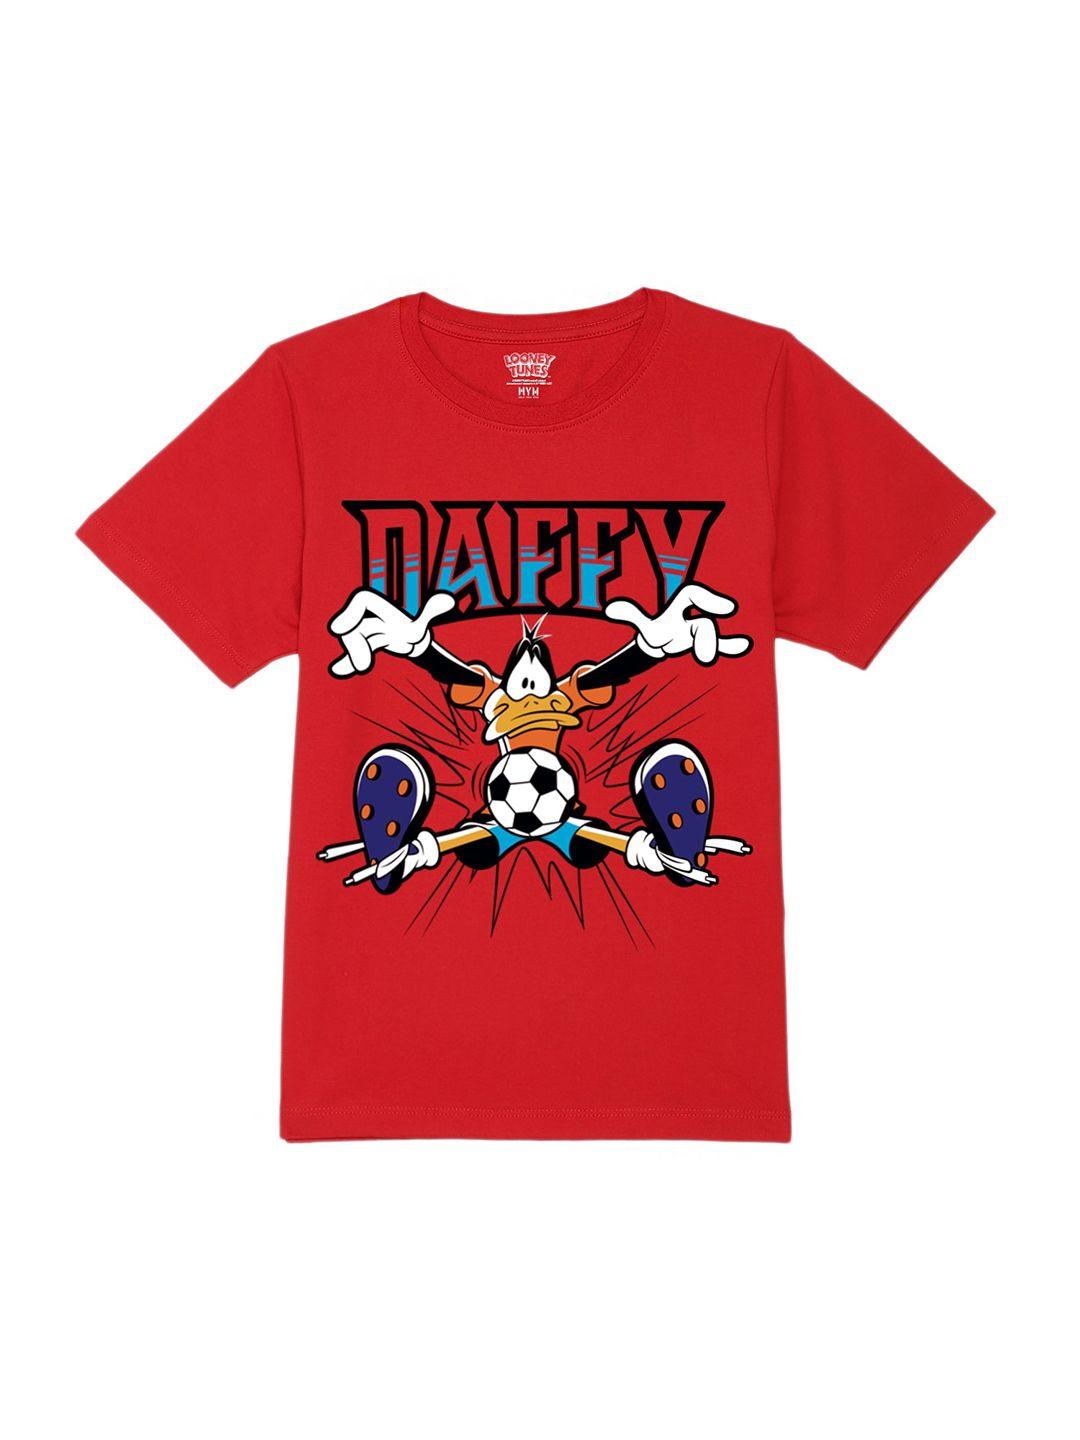 wear-your-mind-boys-looney-tunes-graphic-printed-pure-cotton-t-shirt